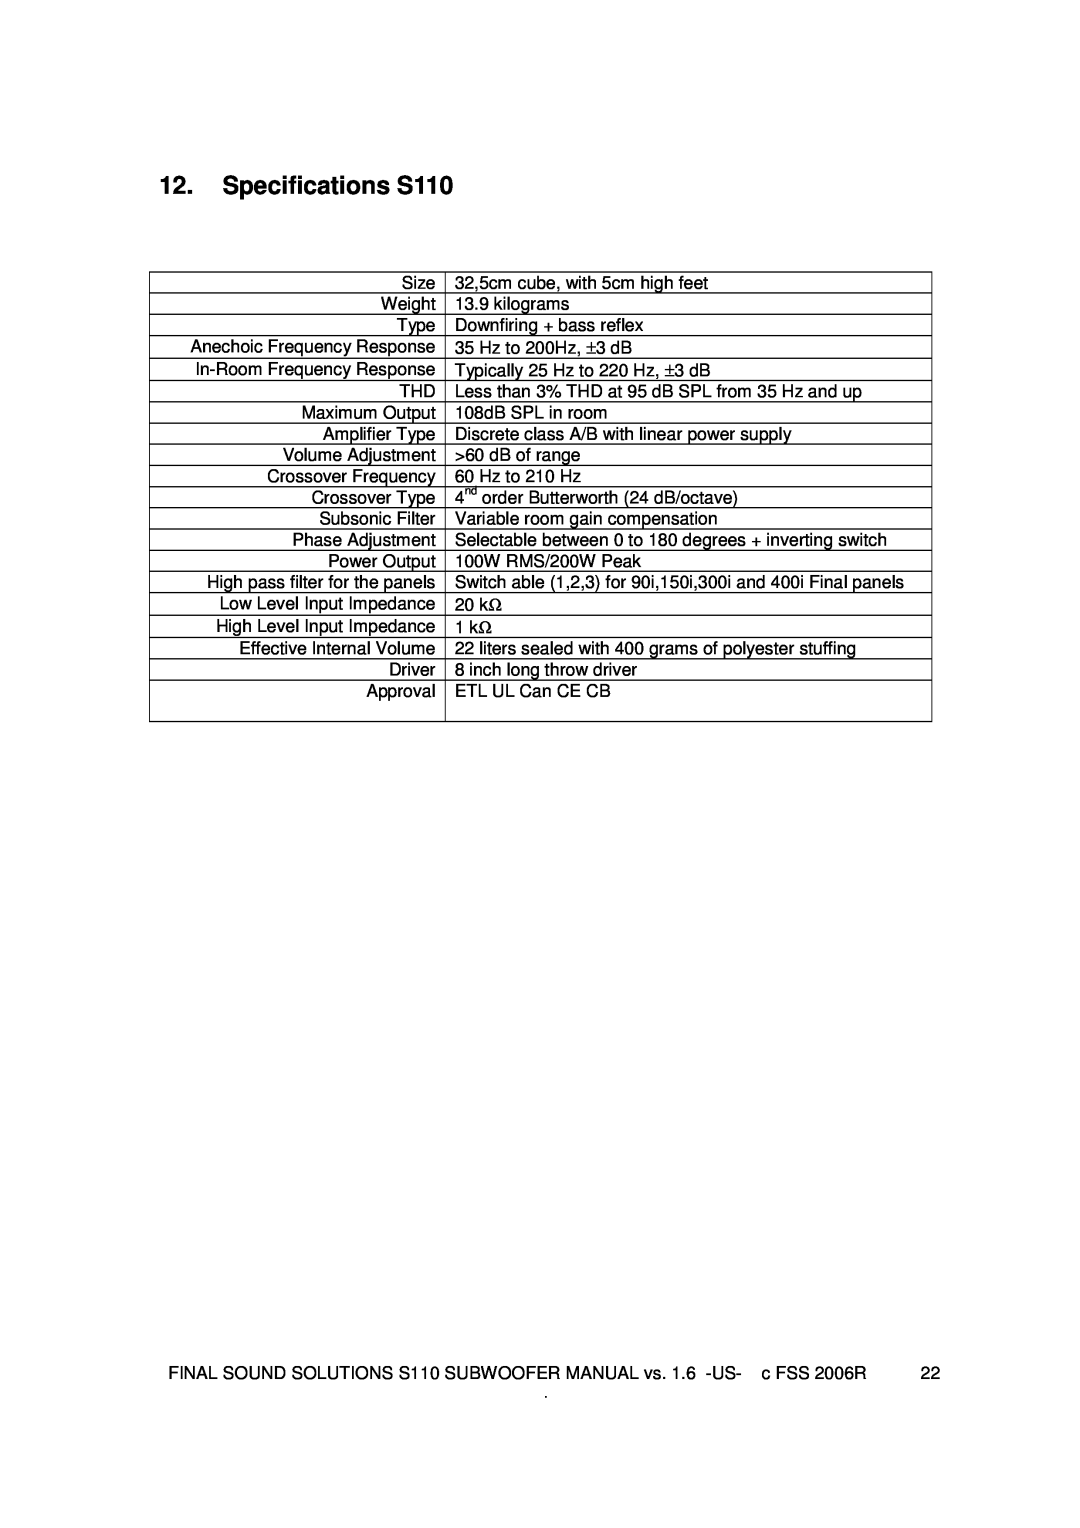 Final Sound user manual Specifications S110 